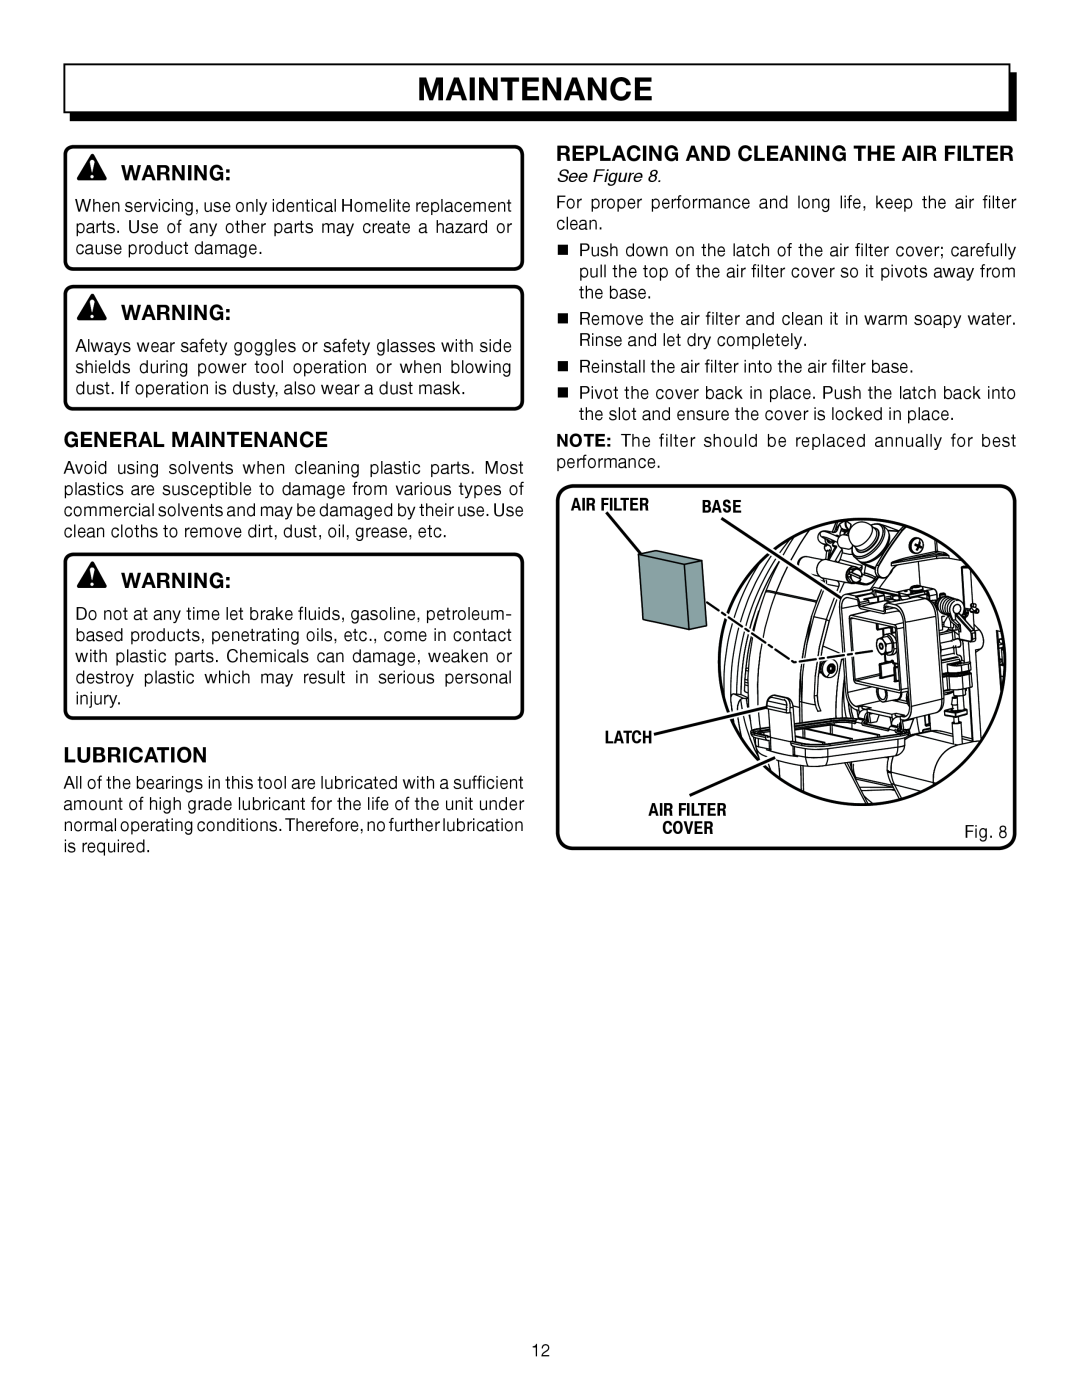 Homelite UT08512B manual Maintenance, Replacing And Cleaning The Air Filter, See Figure, Latch 